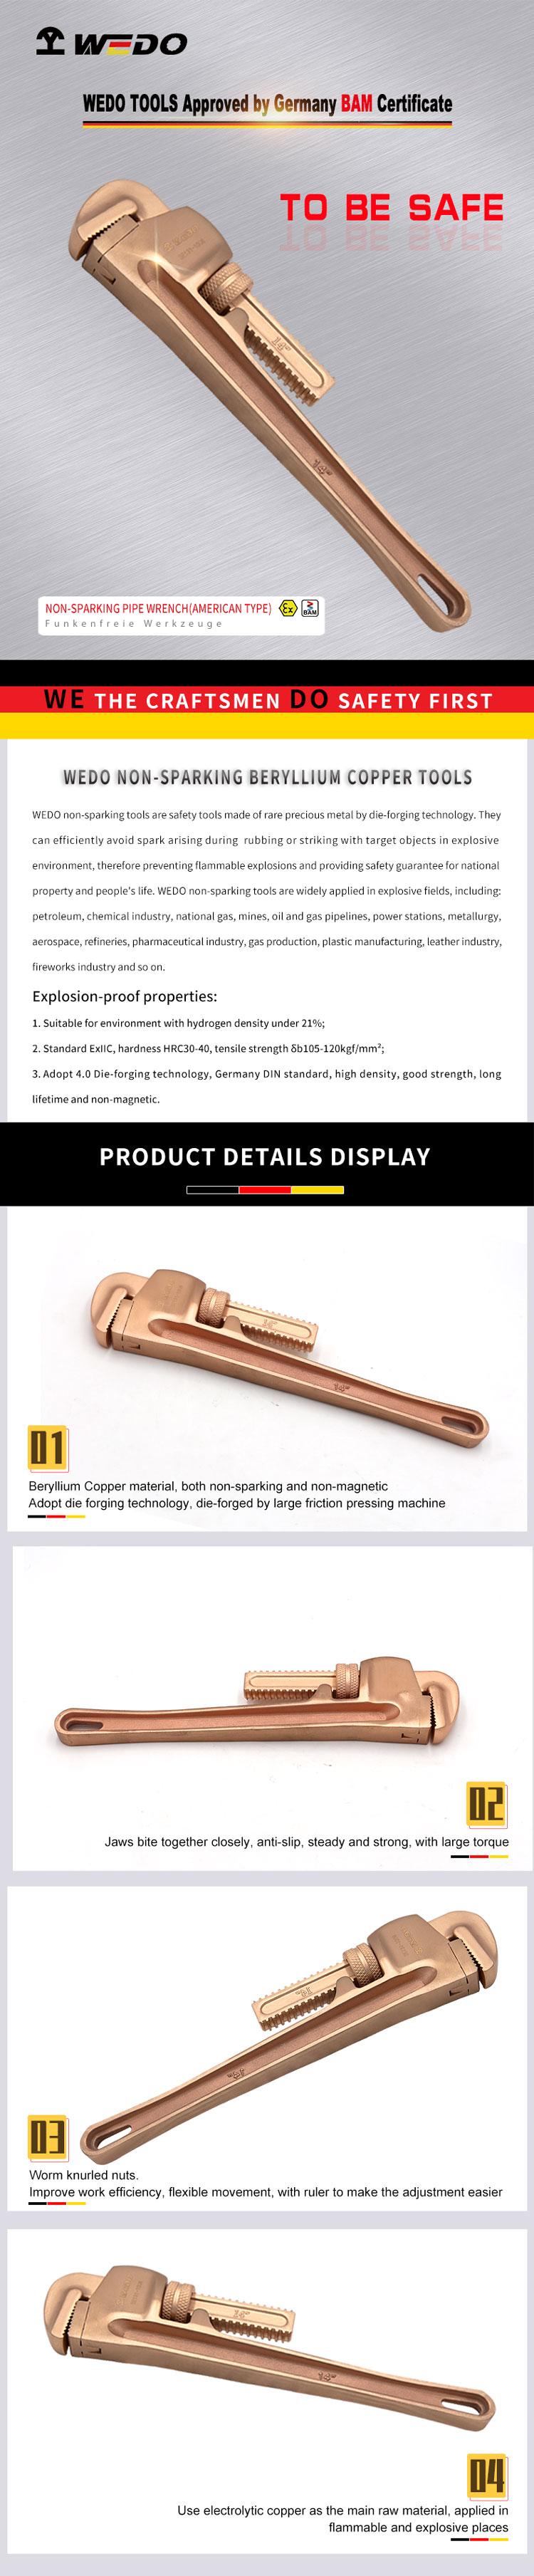 American Pipe Wrench BE131(图1)